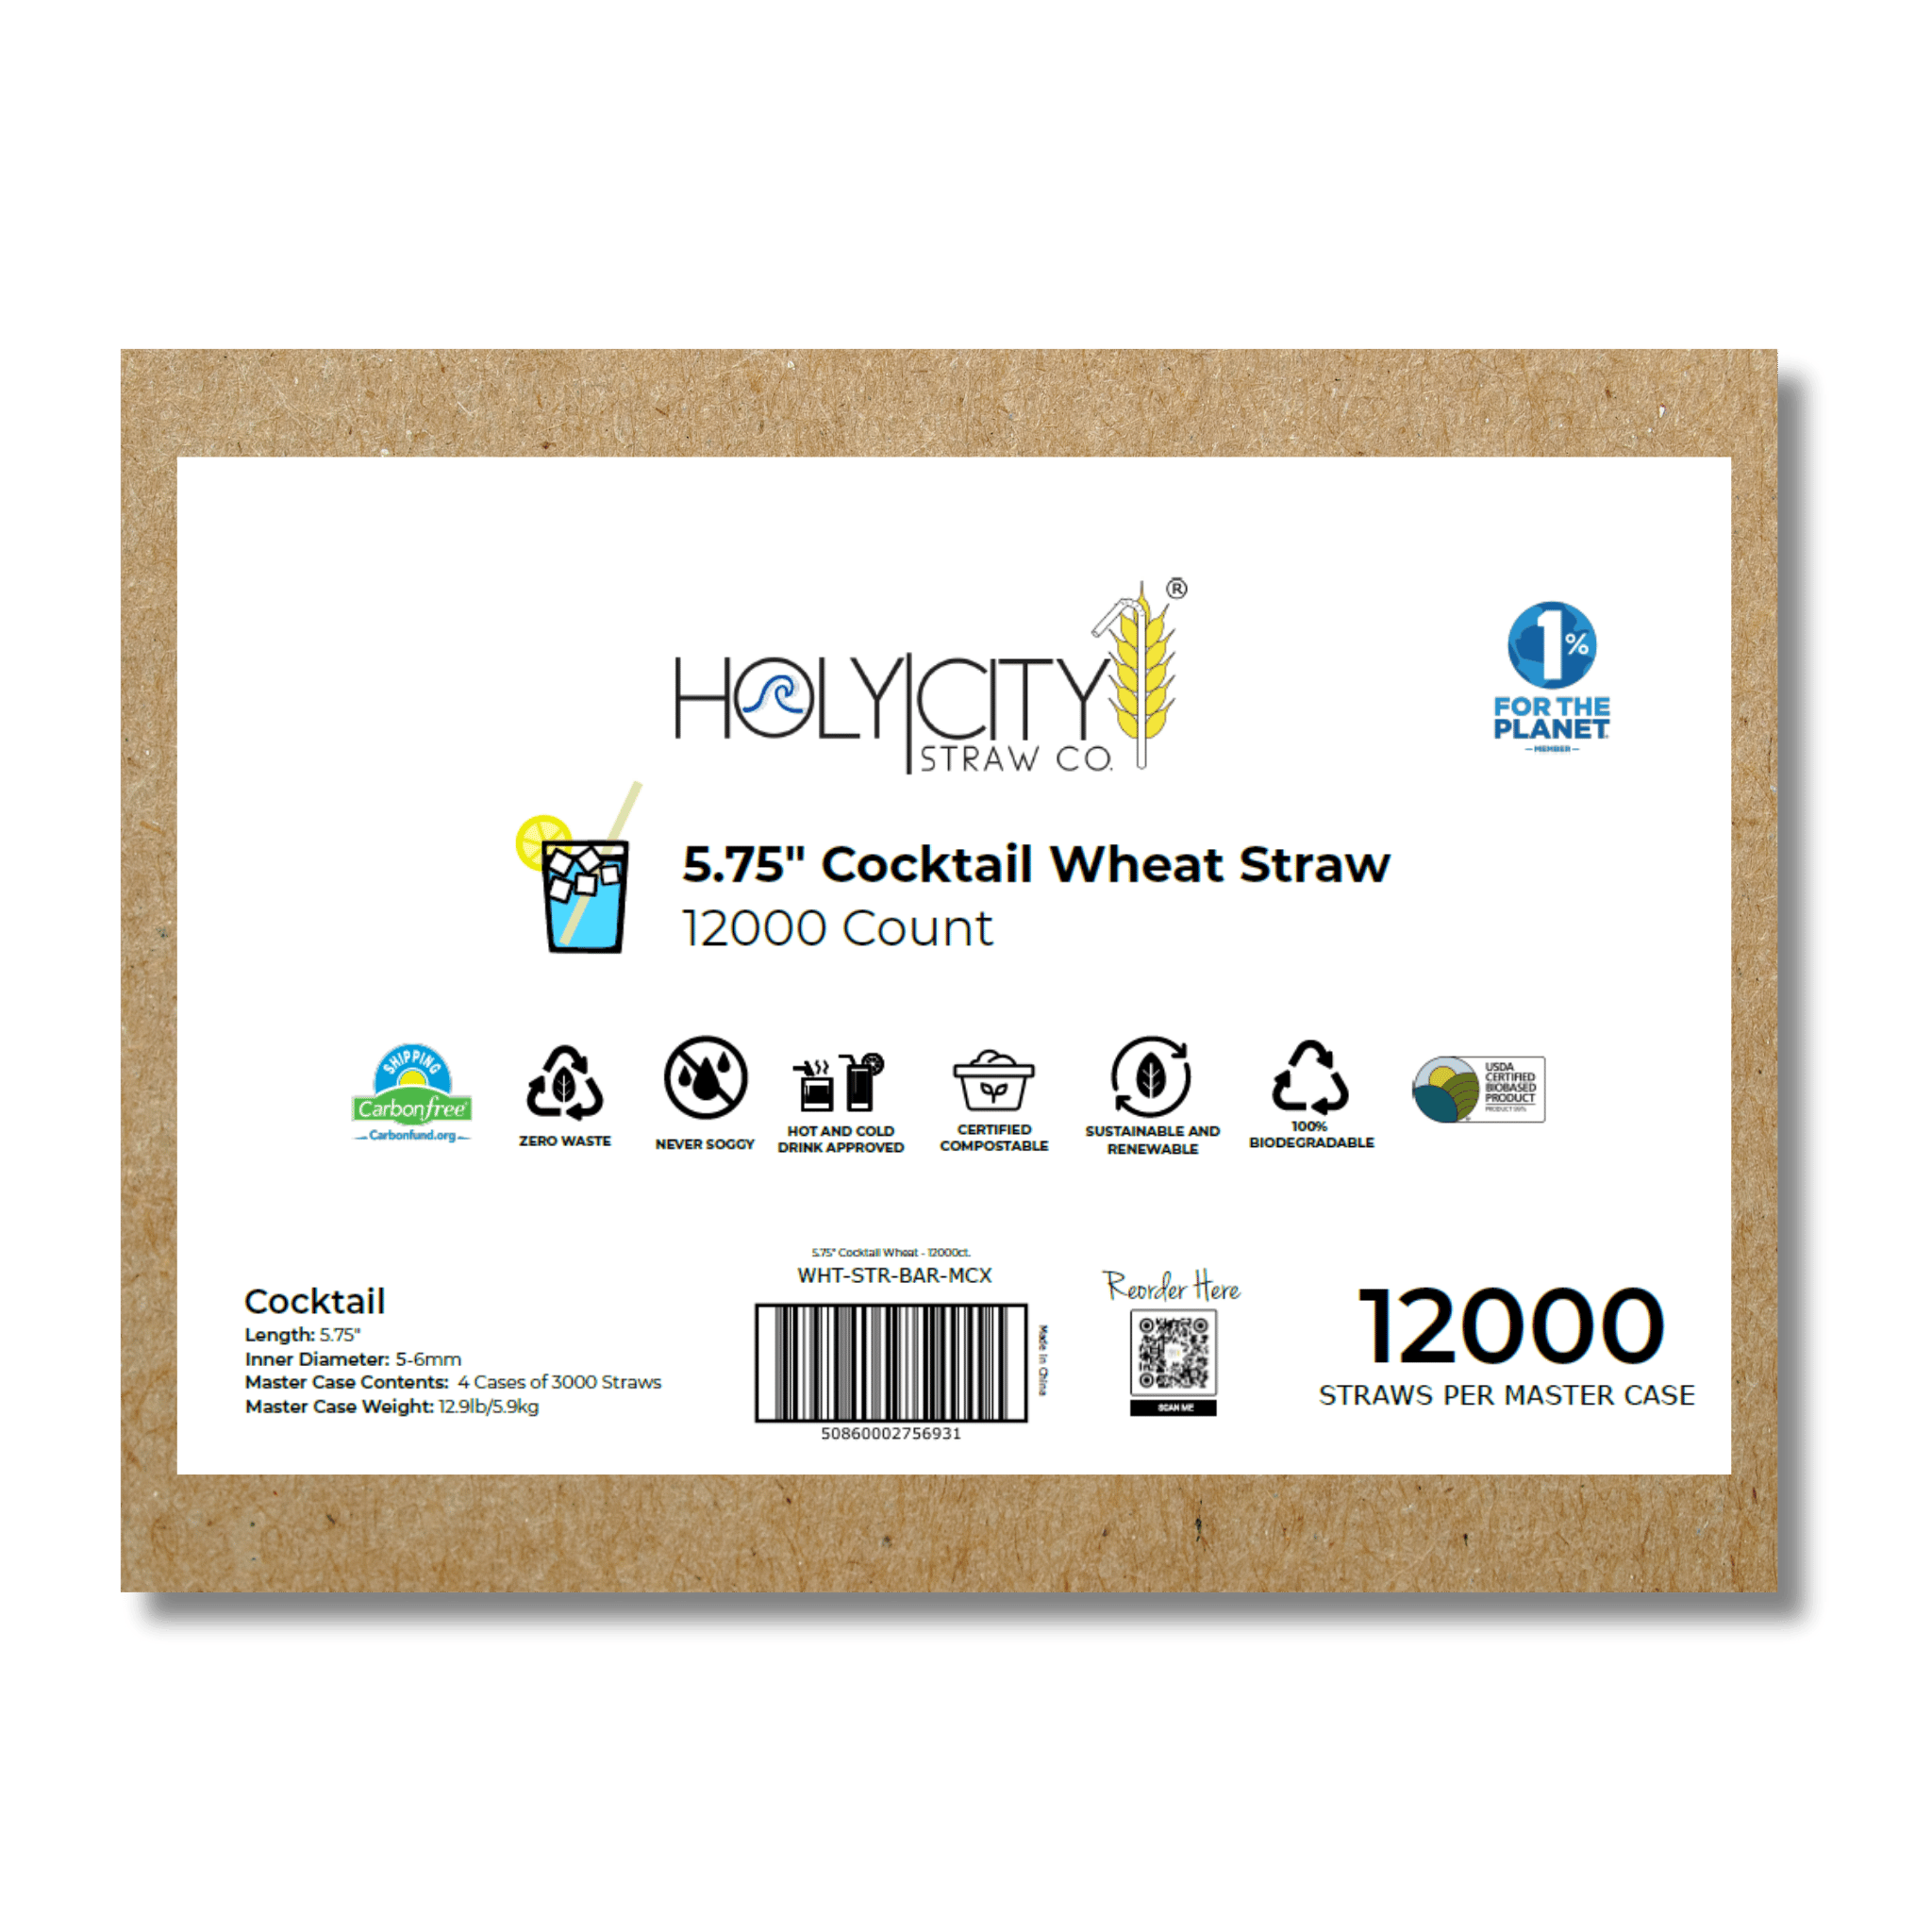 HolyCityStrawCompany 5.75-inch Wheat Cocktail Straws box of 12000 straws with environmental certifications and usage icons